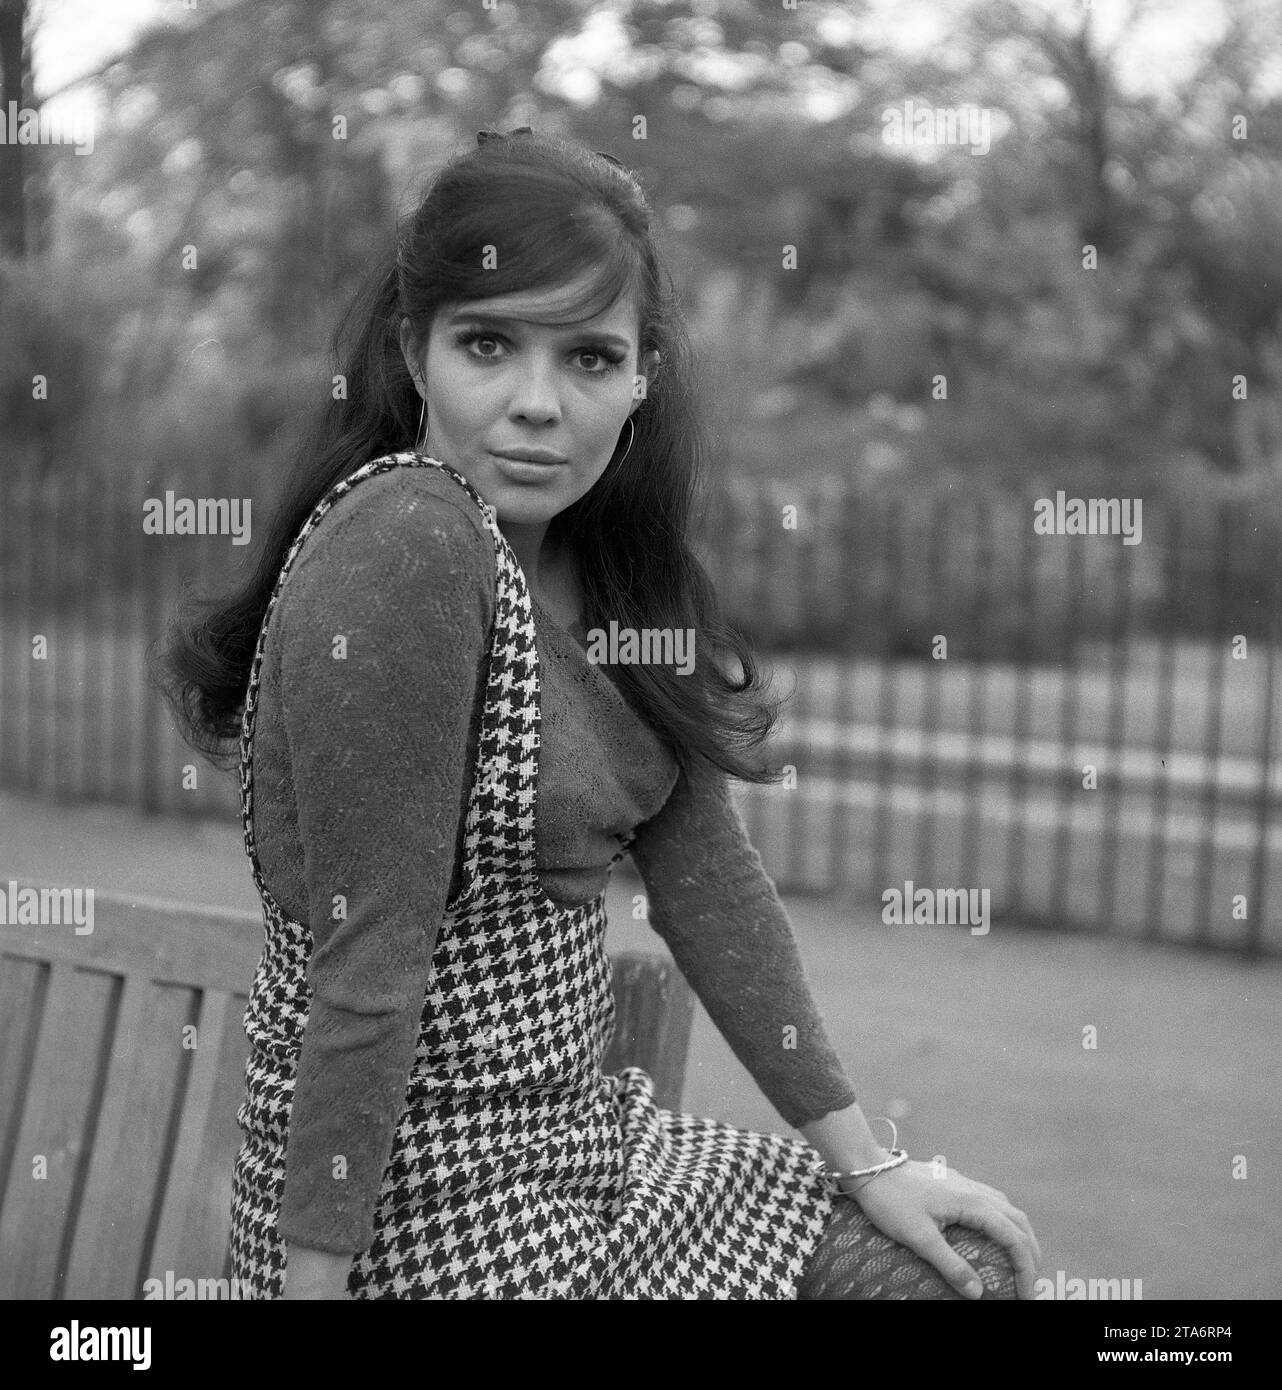 Hollywood actress, author and model Viviane Ventura poses in a London park in the swinging 60s Stock Photo